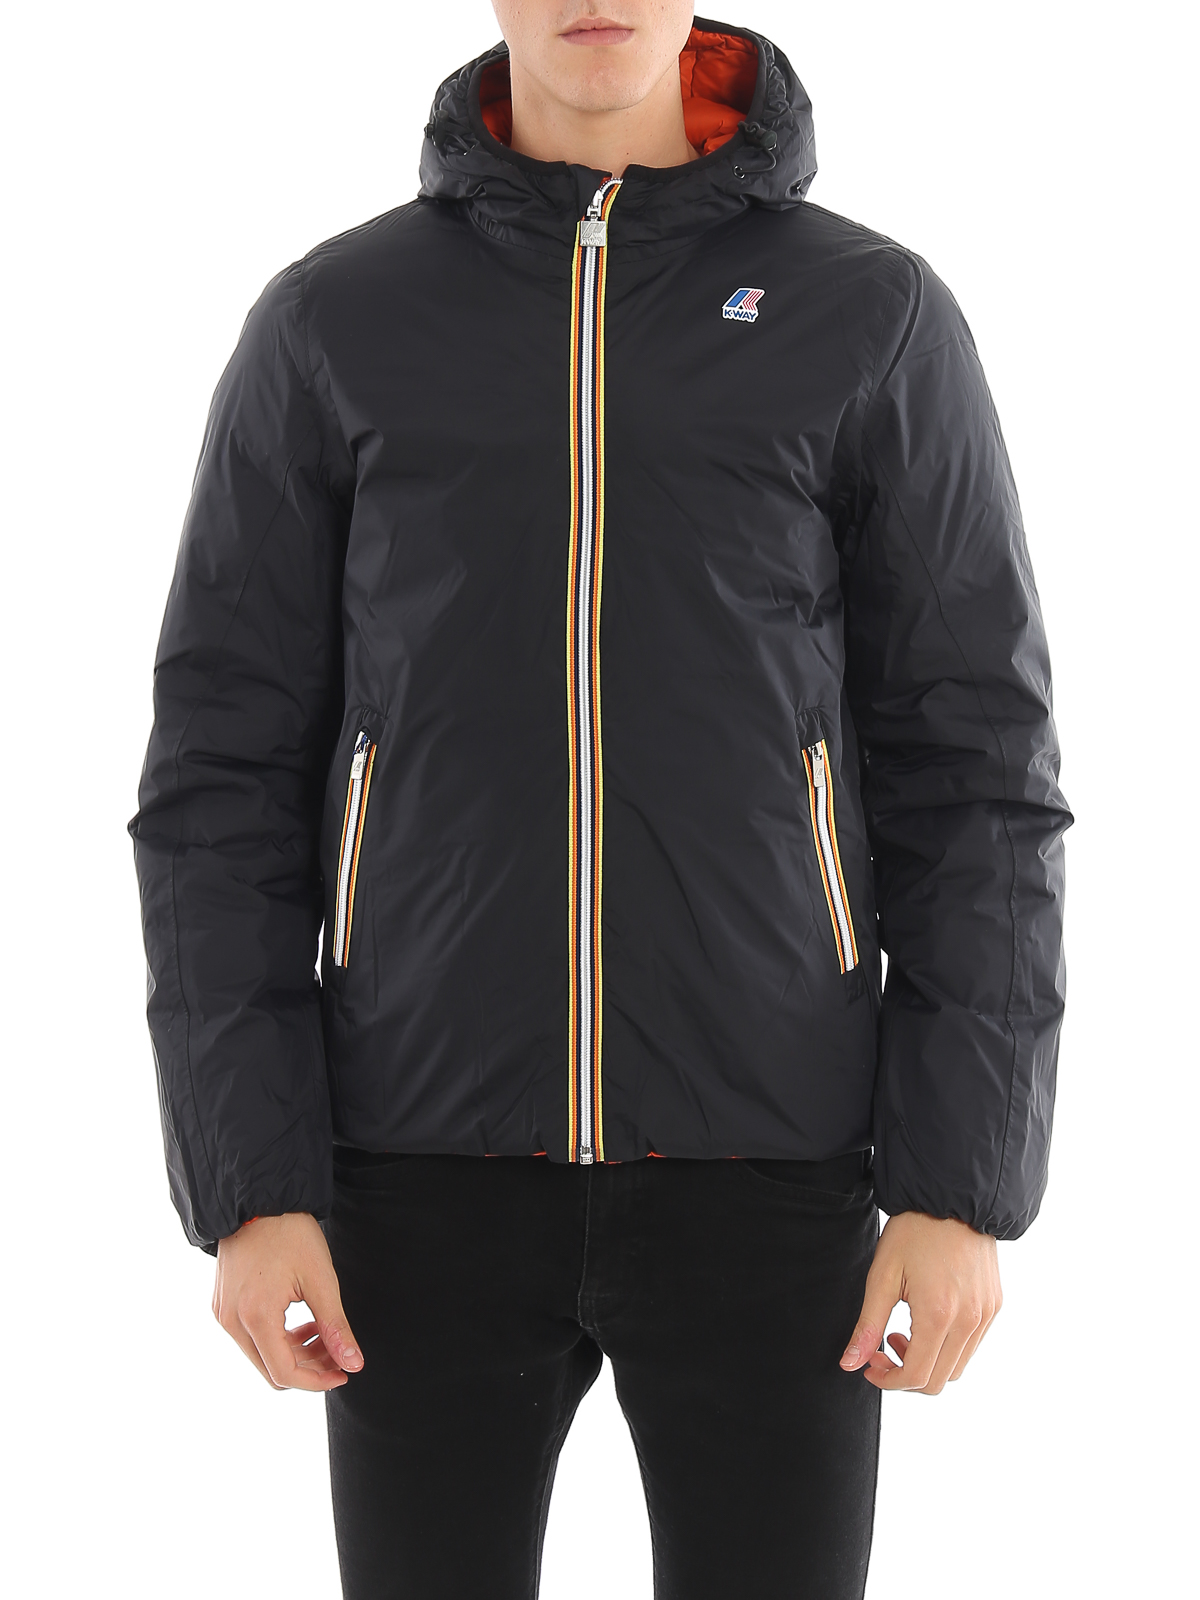 Padded jackets k-way - Jacques Thermo Plus reversible puffer jacket ...